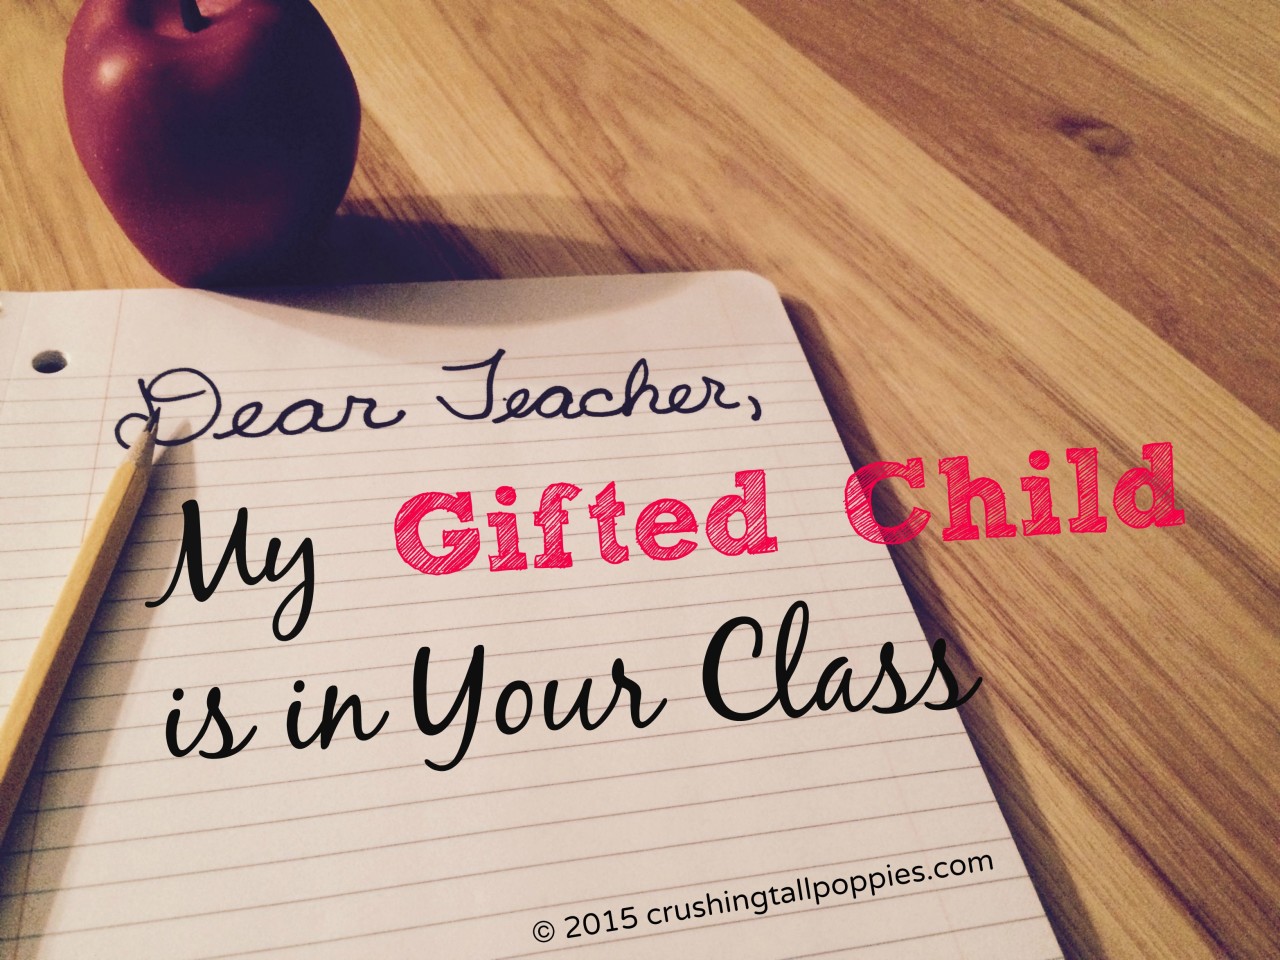 Dear Teacher, My Gifted Child is in